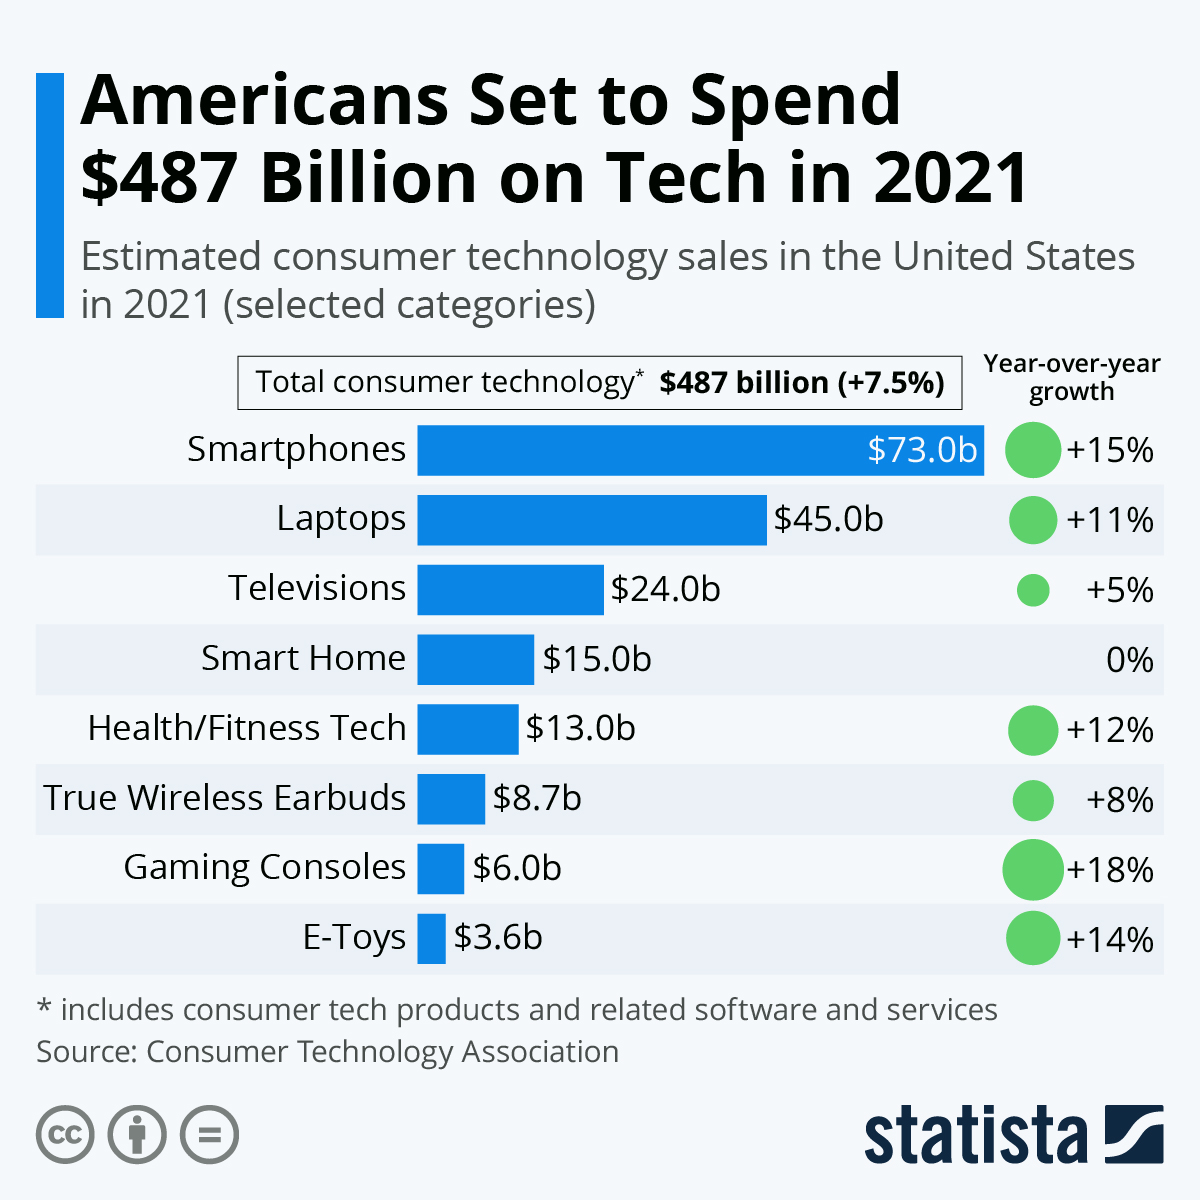 Statista: Americans Set to Spend $487 Billion on Tech in 2021